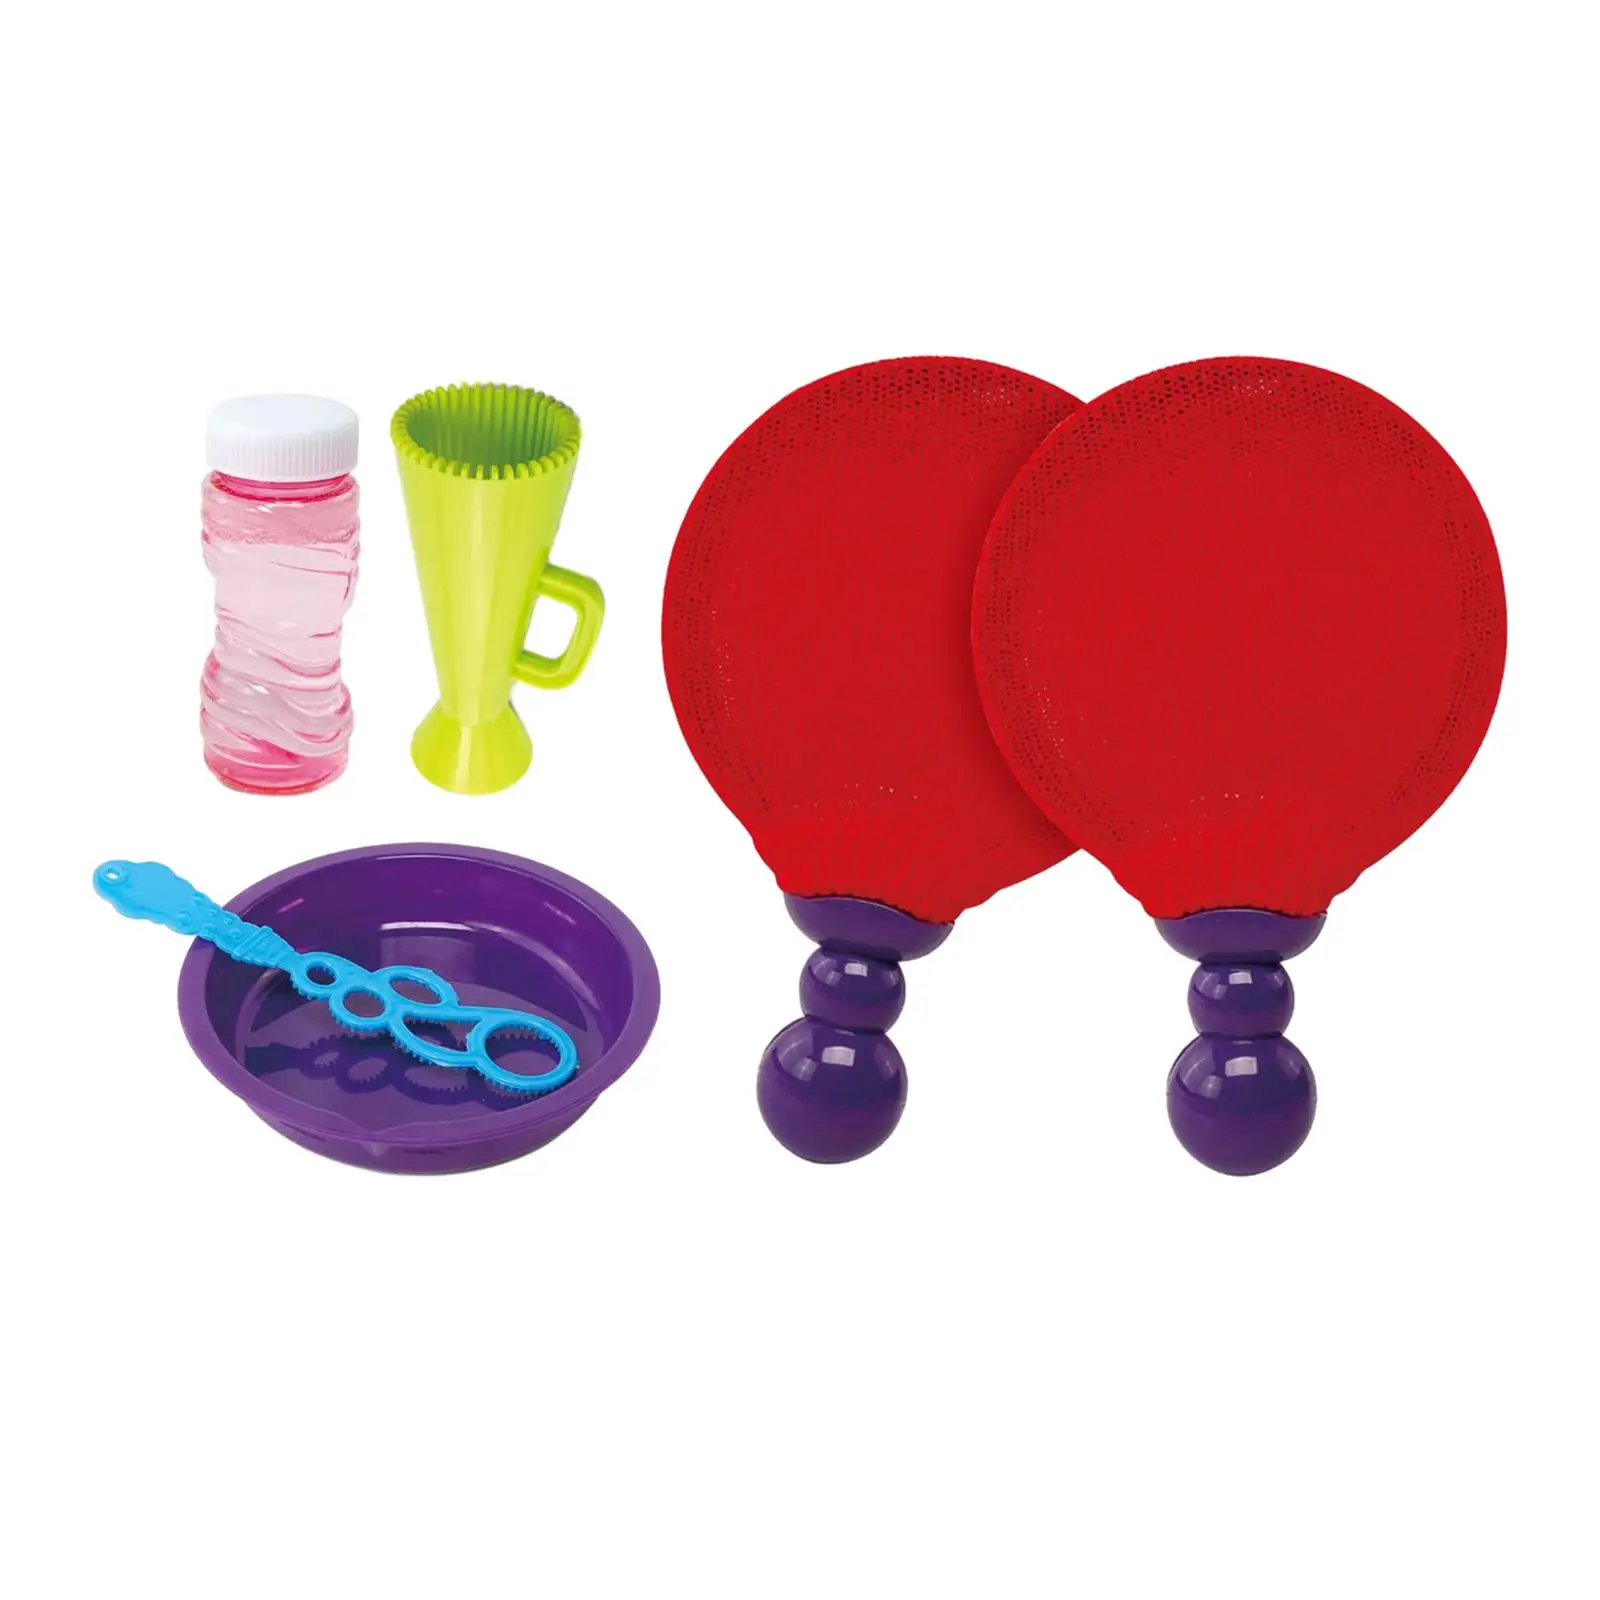 Toss and Catch Bubble Game Table Tennis Catching Bubble Game and Fun for Adult Family Playground Activities Lawn